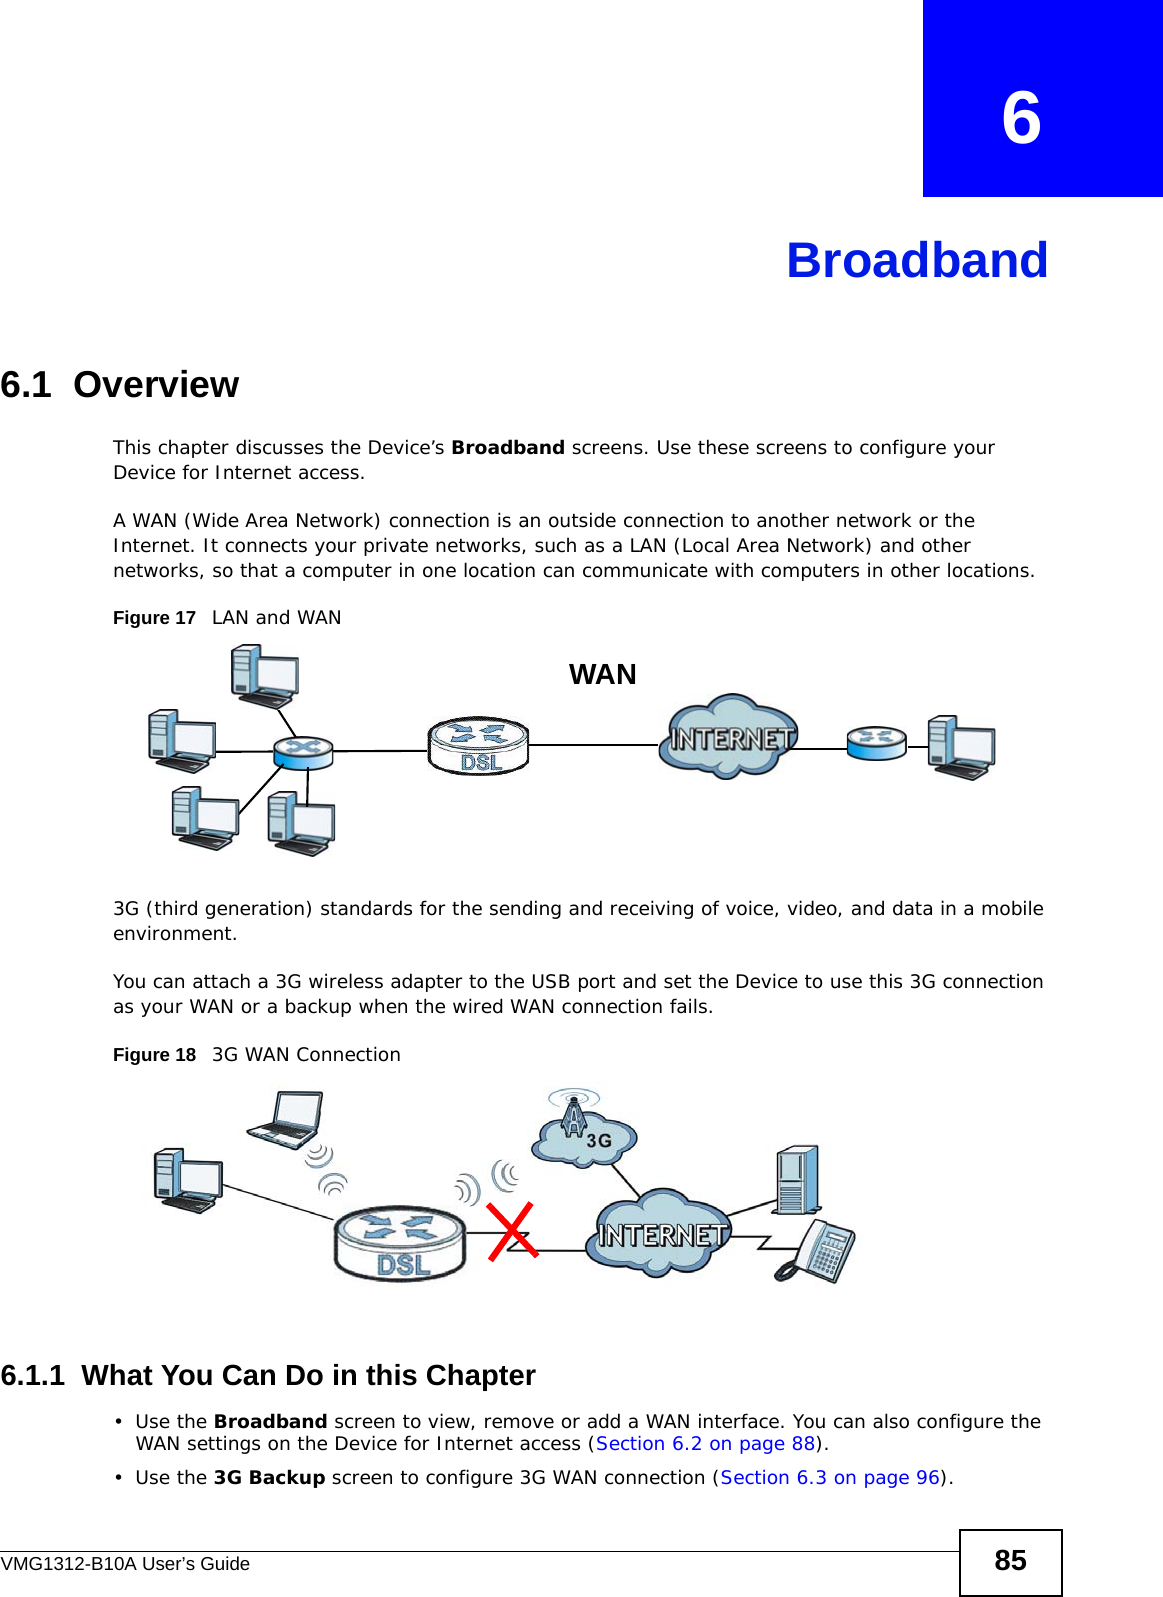 VMG1312-B10A User’s Guide 85CHAPTER   6Broadband6.1  OverviewThis chapter discusses the Device’s Broadband screens. Use these screens to configure your Device for Internet access.A WAN (Wide Area Network) connection is an outside connection to another network or the Internet. It connects your private networks, such as a LAN (Local Area Network) and other networks, so that a computer in one location can communicate with computers in other locations.Figure 17   LAN and WAN3G (third generation) standards for the sending and receiving of voice, video, and data in a mobile environment. You can attach a 3G wireless adapter to the USB port and set the Device to use this 3G connection as your WAN or a backup when the wired WAN connection fails.Figure 18   3G WAN Connection 6.1.1  What You Can Do in this Chapter•Use the Broadband screen to view, remove or add a WAN interface. You can also configure the WAN settings on the Device for Internet access (Section 6.2 on page 88).•Use the 3G Backup screen to configure 3G WAN connection (Section 6.3 on page 96). WAN